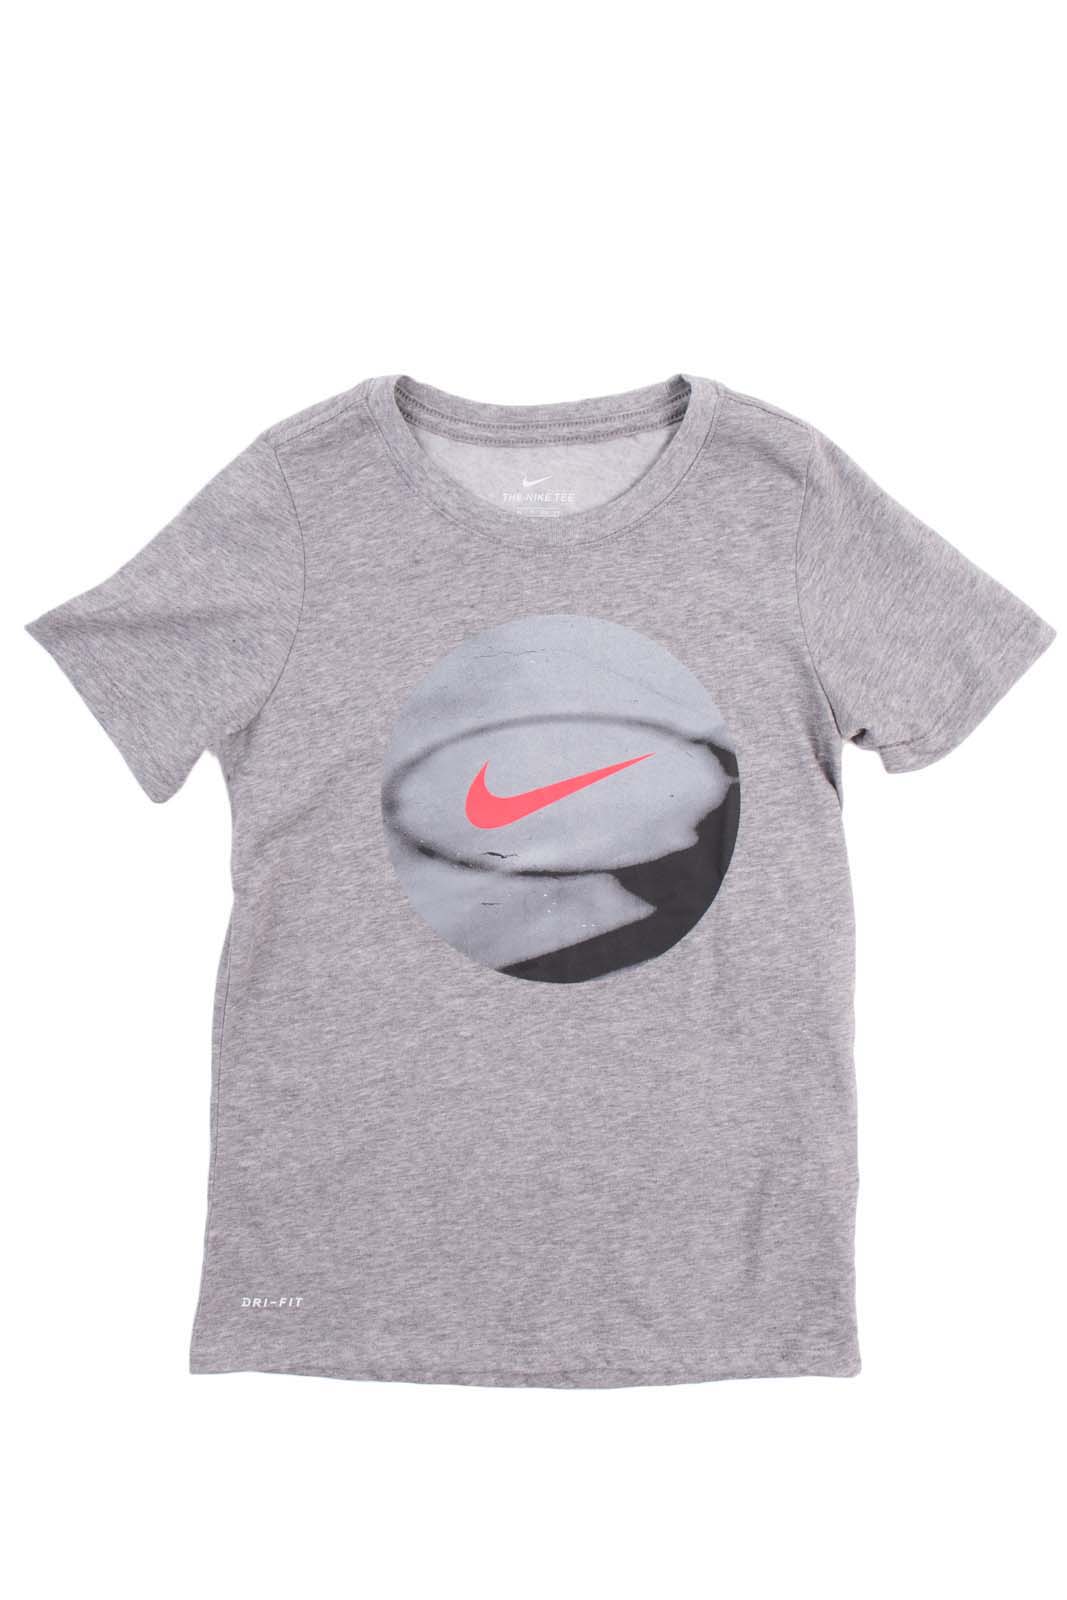 NIKE T-Shirt Top Size XS / 6-8Y / 122-128CM DRI-FIT Coated Ball Short Sleeve gallery main photo